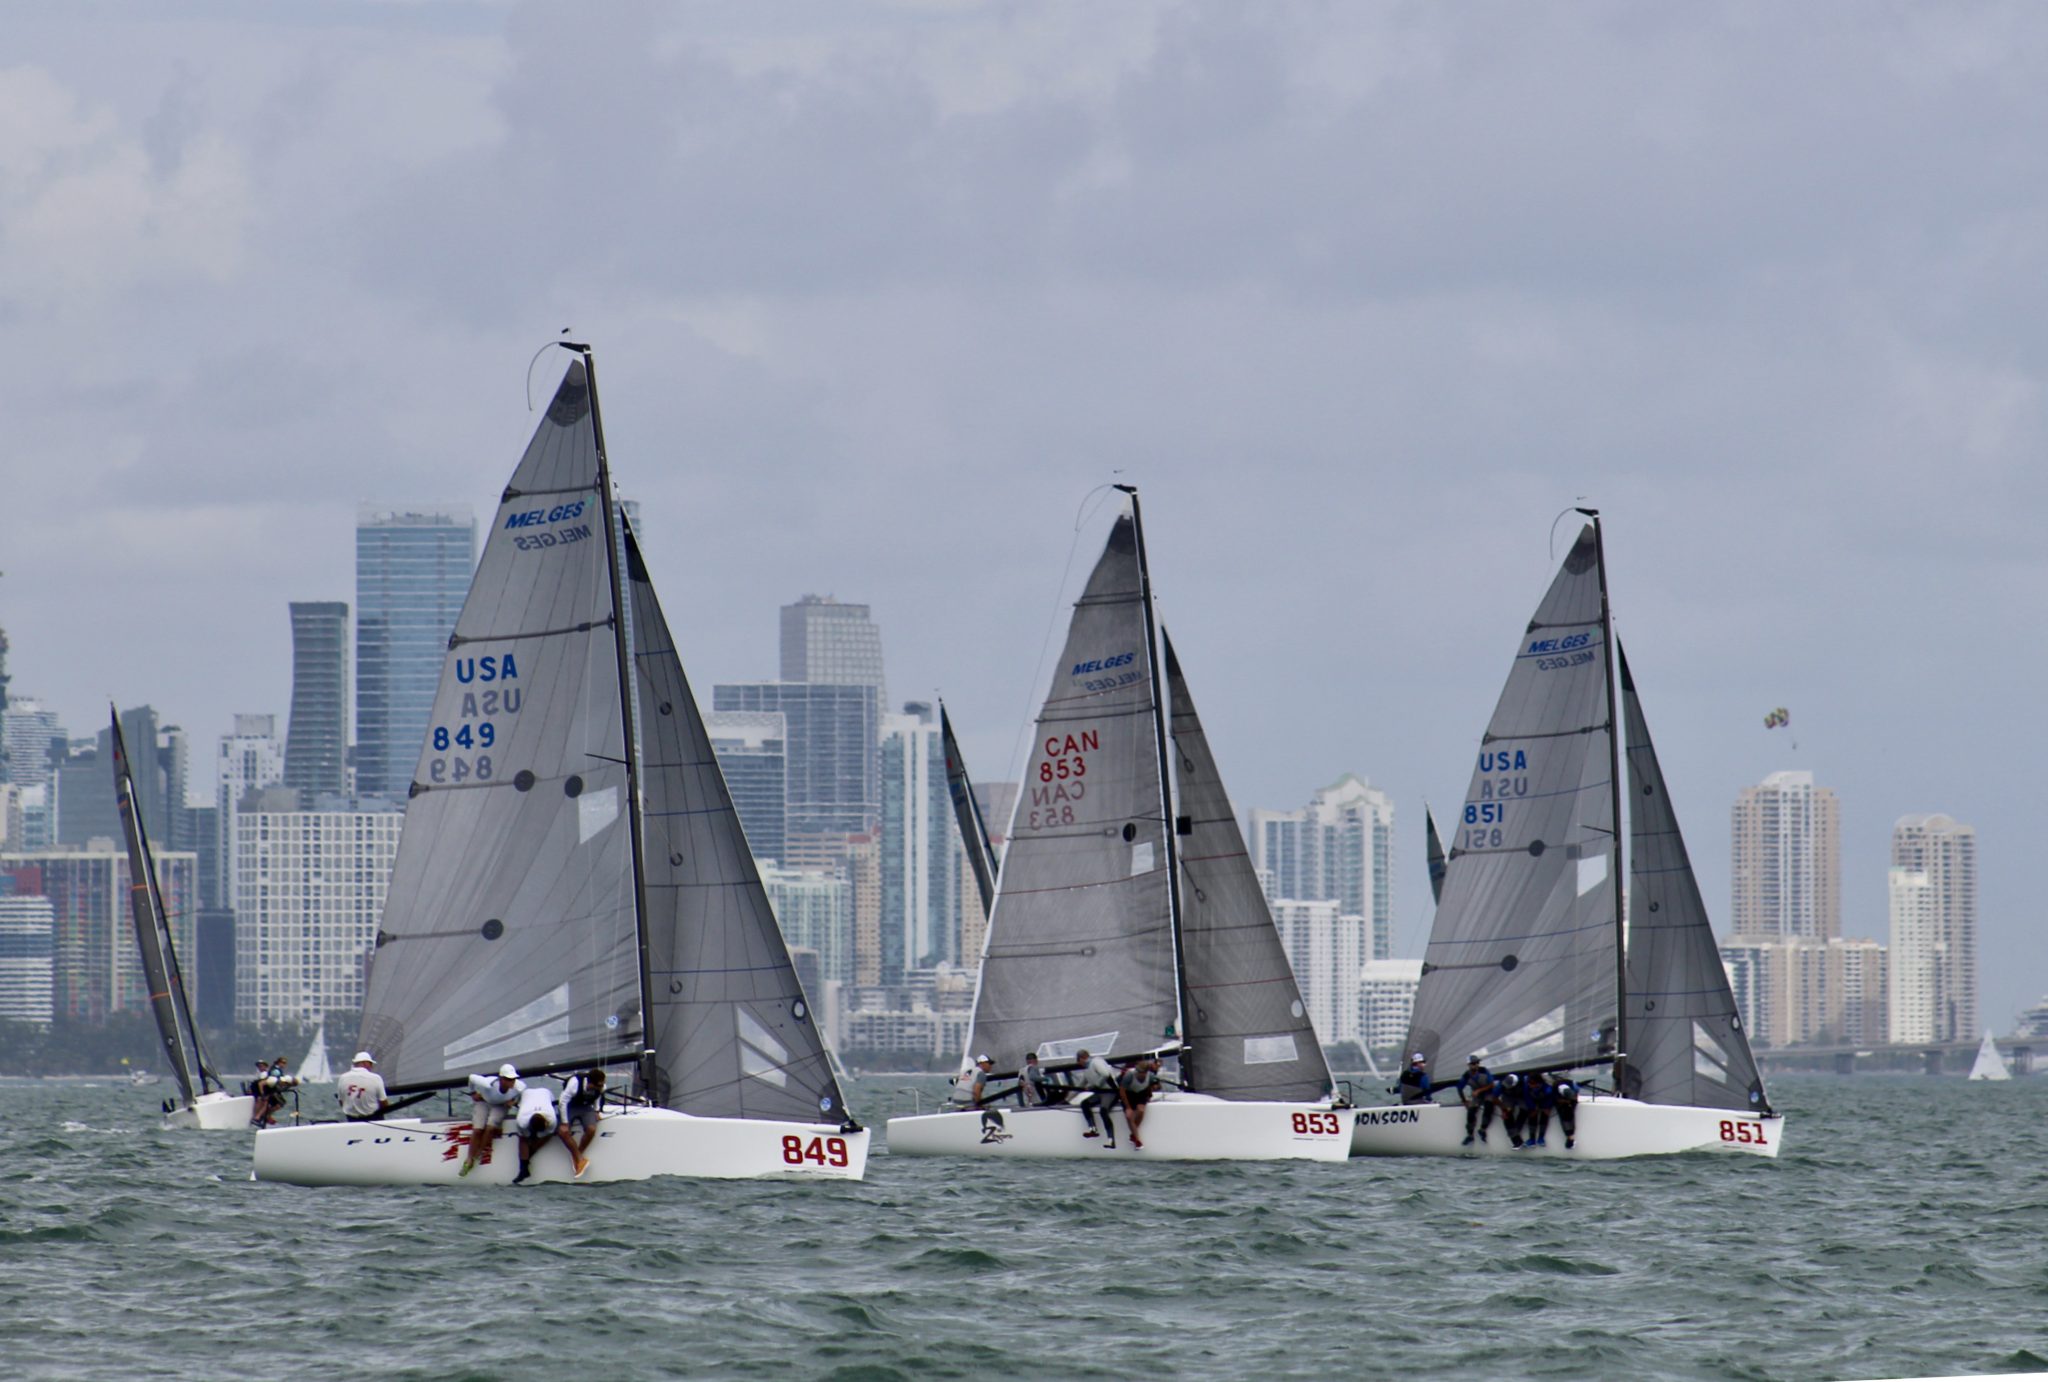  J/70, Melges 24  2020 Bacardi Invitational Winter Series  Event 1  Day 1, 21 J/70 and 19 Melges 24 racing